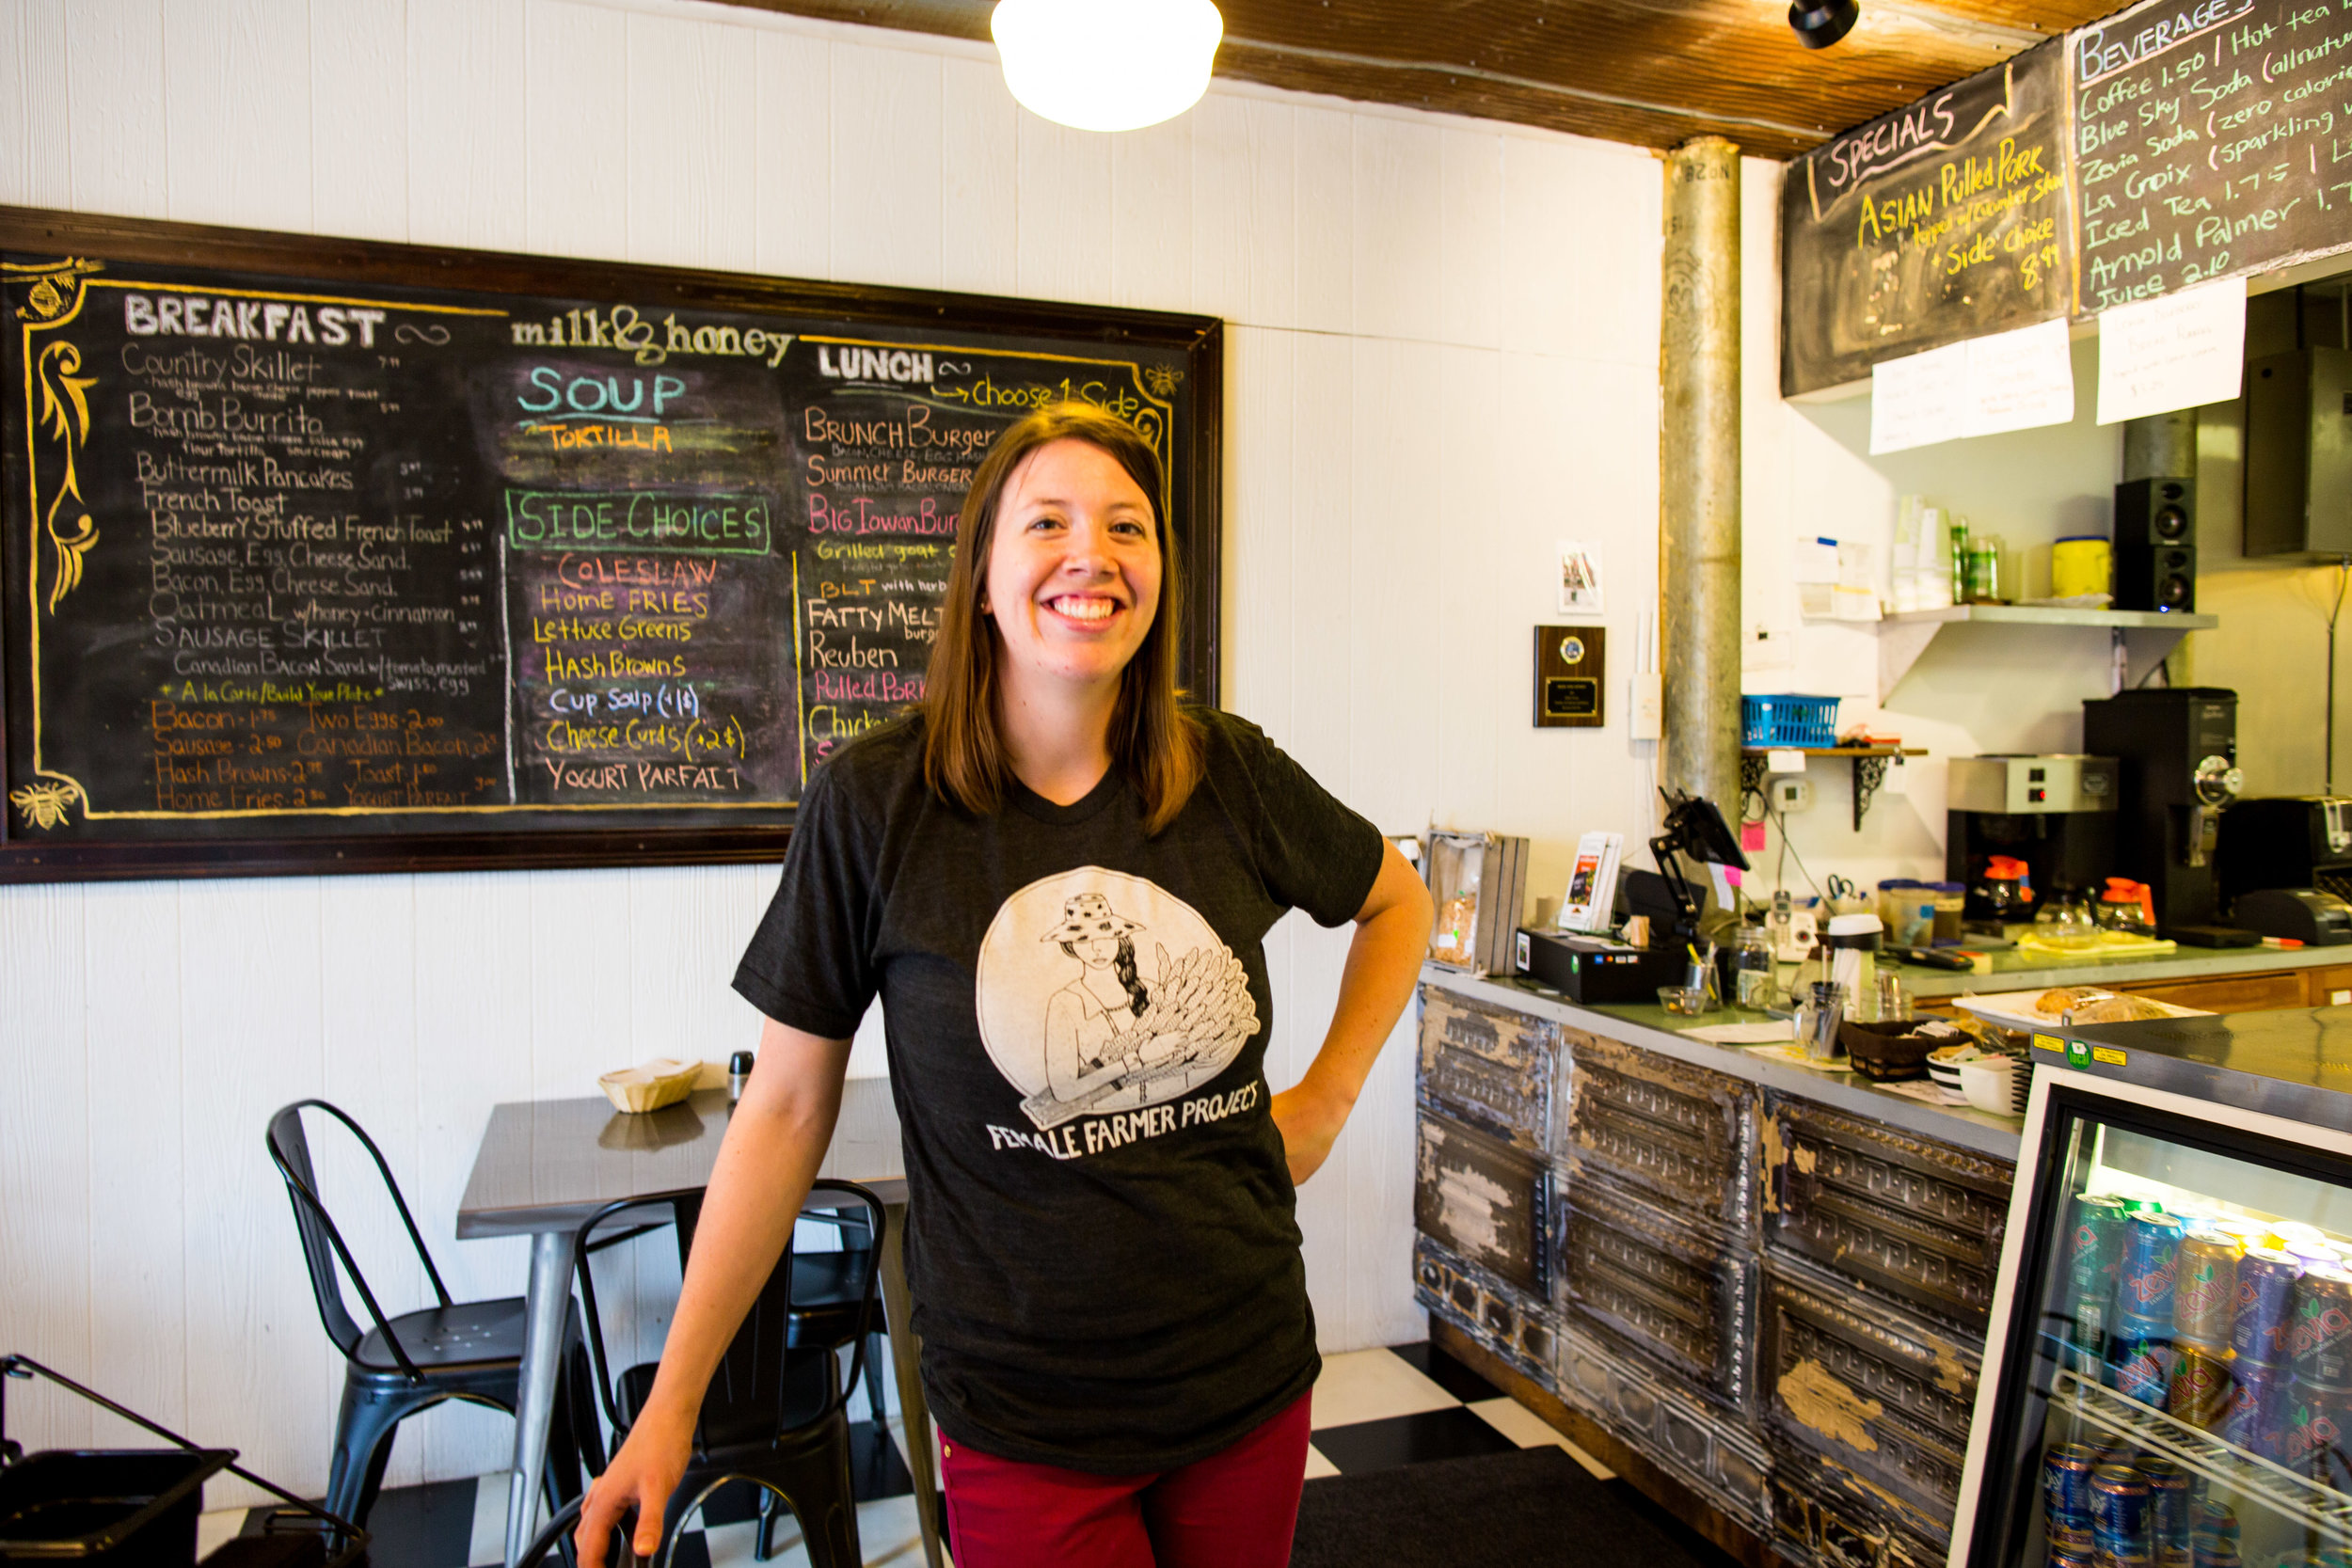 Ellen also owns and operates a farm to table cafe in Harlan, IA